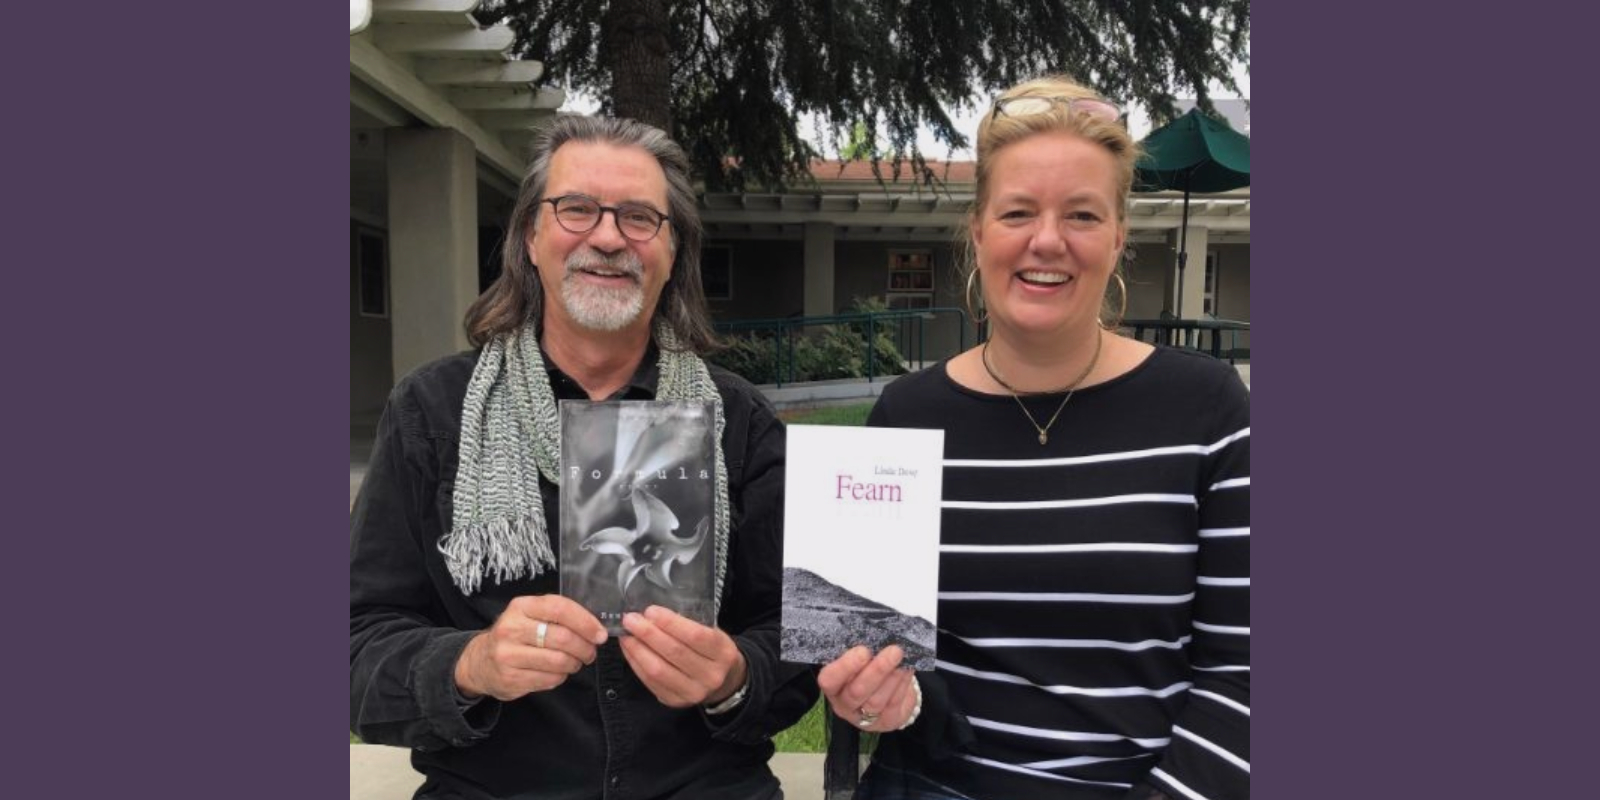 College of Liberal Arts Poets Publish Highly-Acclaimed New Books